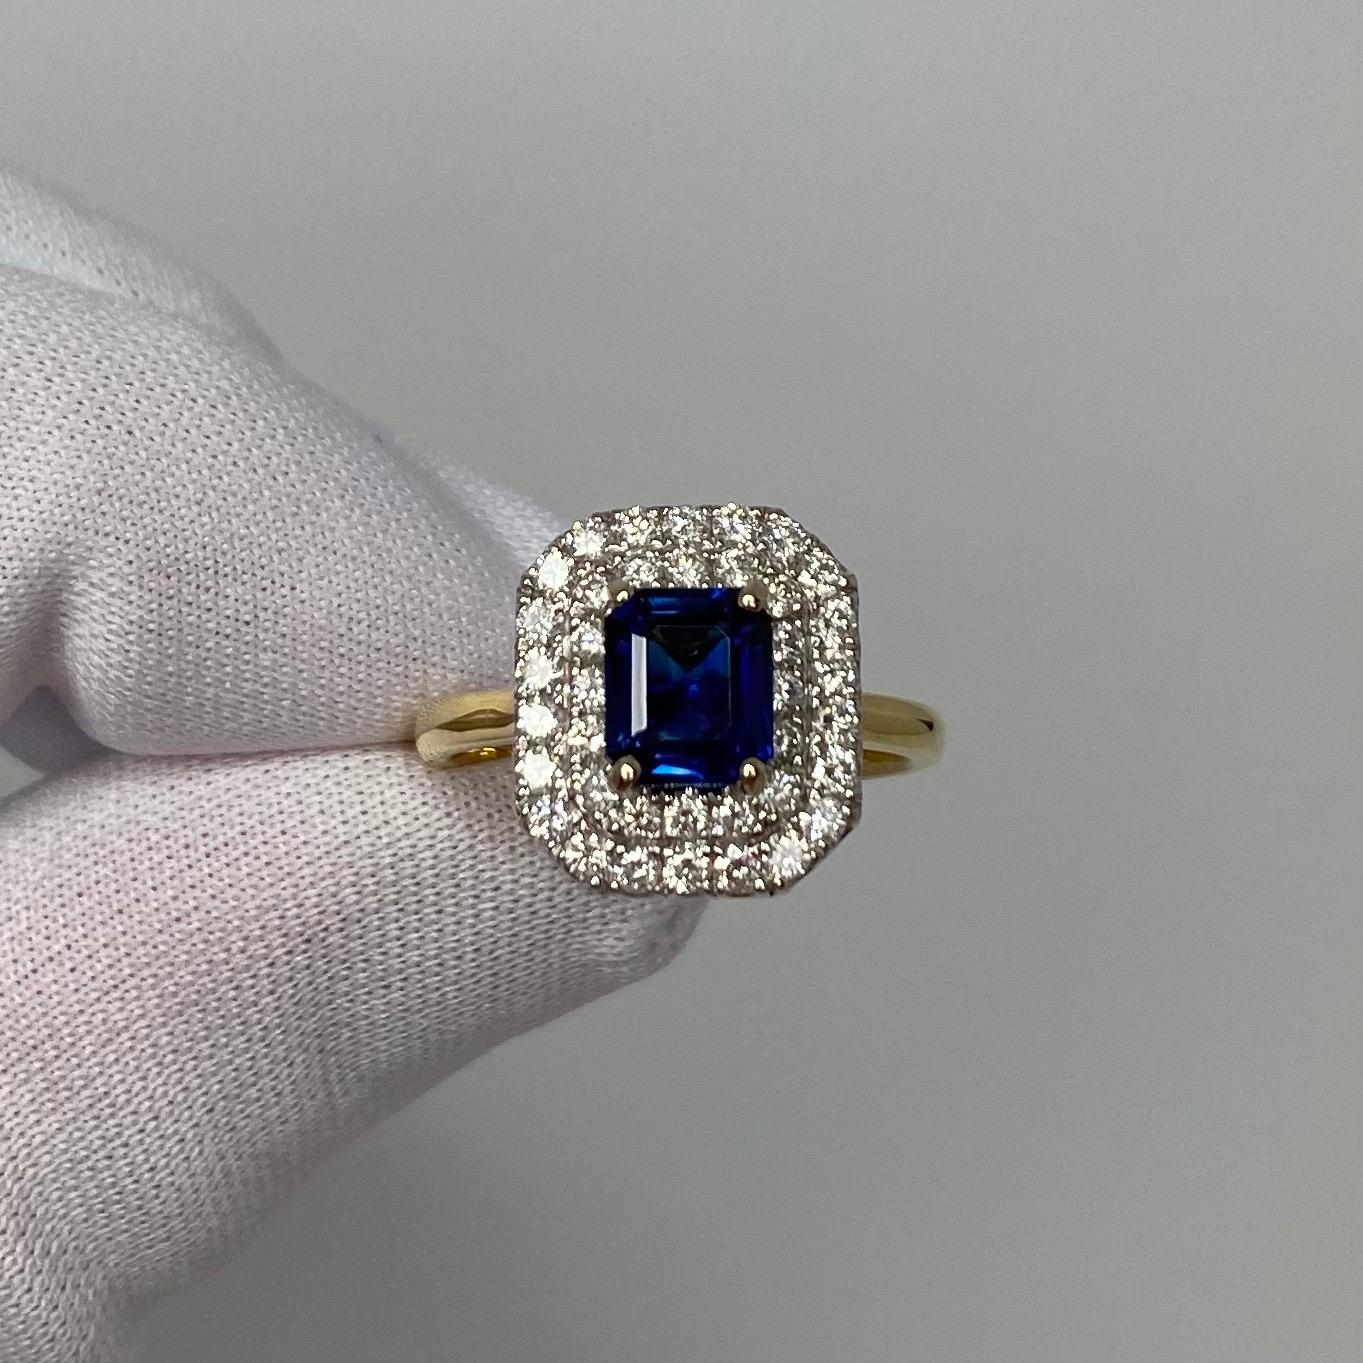 Deep Blue Burmese Sapphire & Diamond 18K Gold Halo Ring.

Stunning 1.45 Carat centre Burmese Sapphire with a fine deep blue colour and an excellent emerald cut. Also has excellent clarity with only some small natural inclusions visible when looking